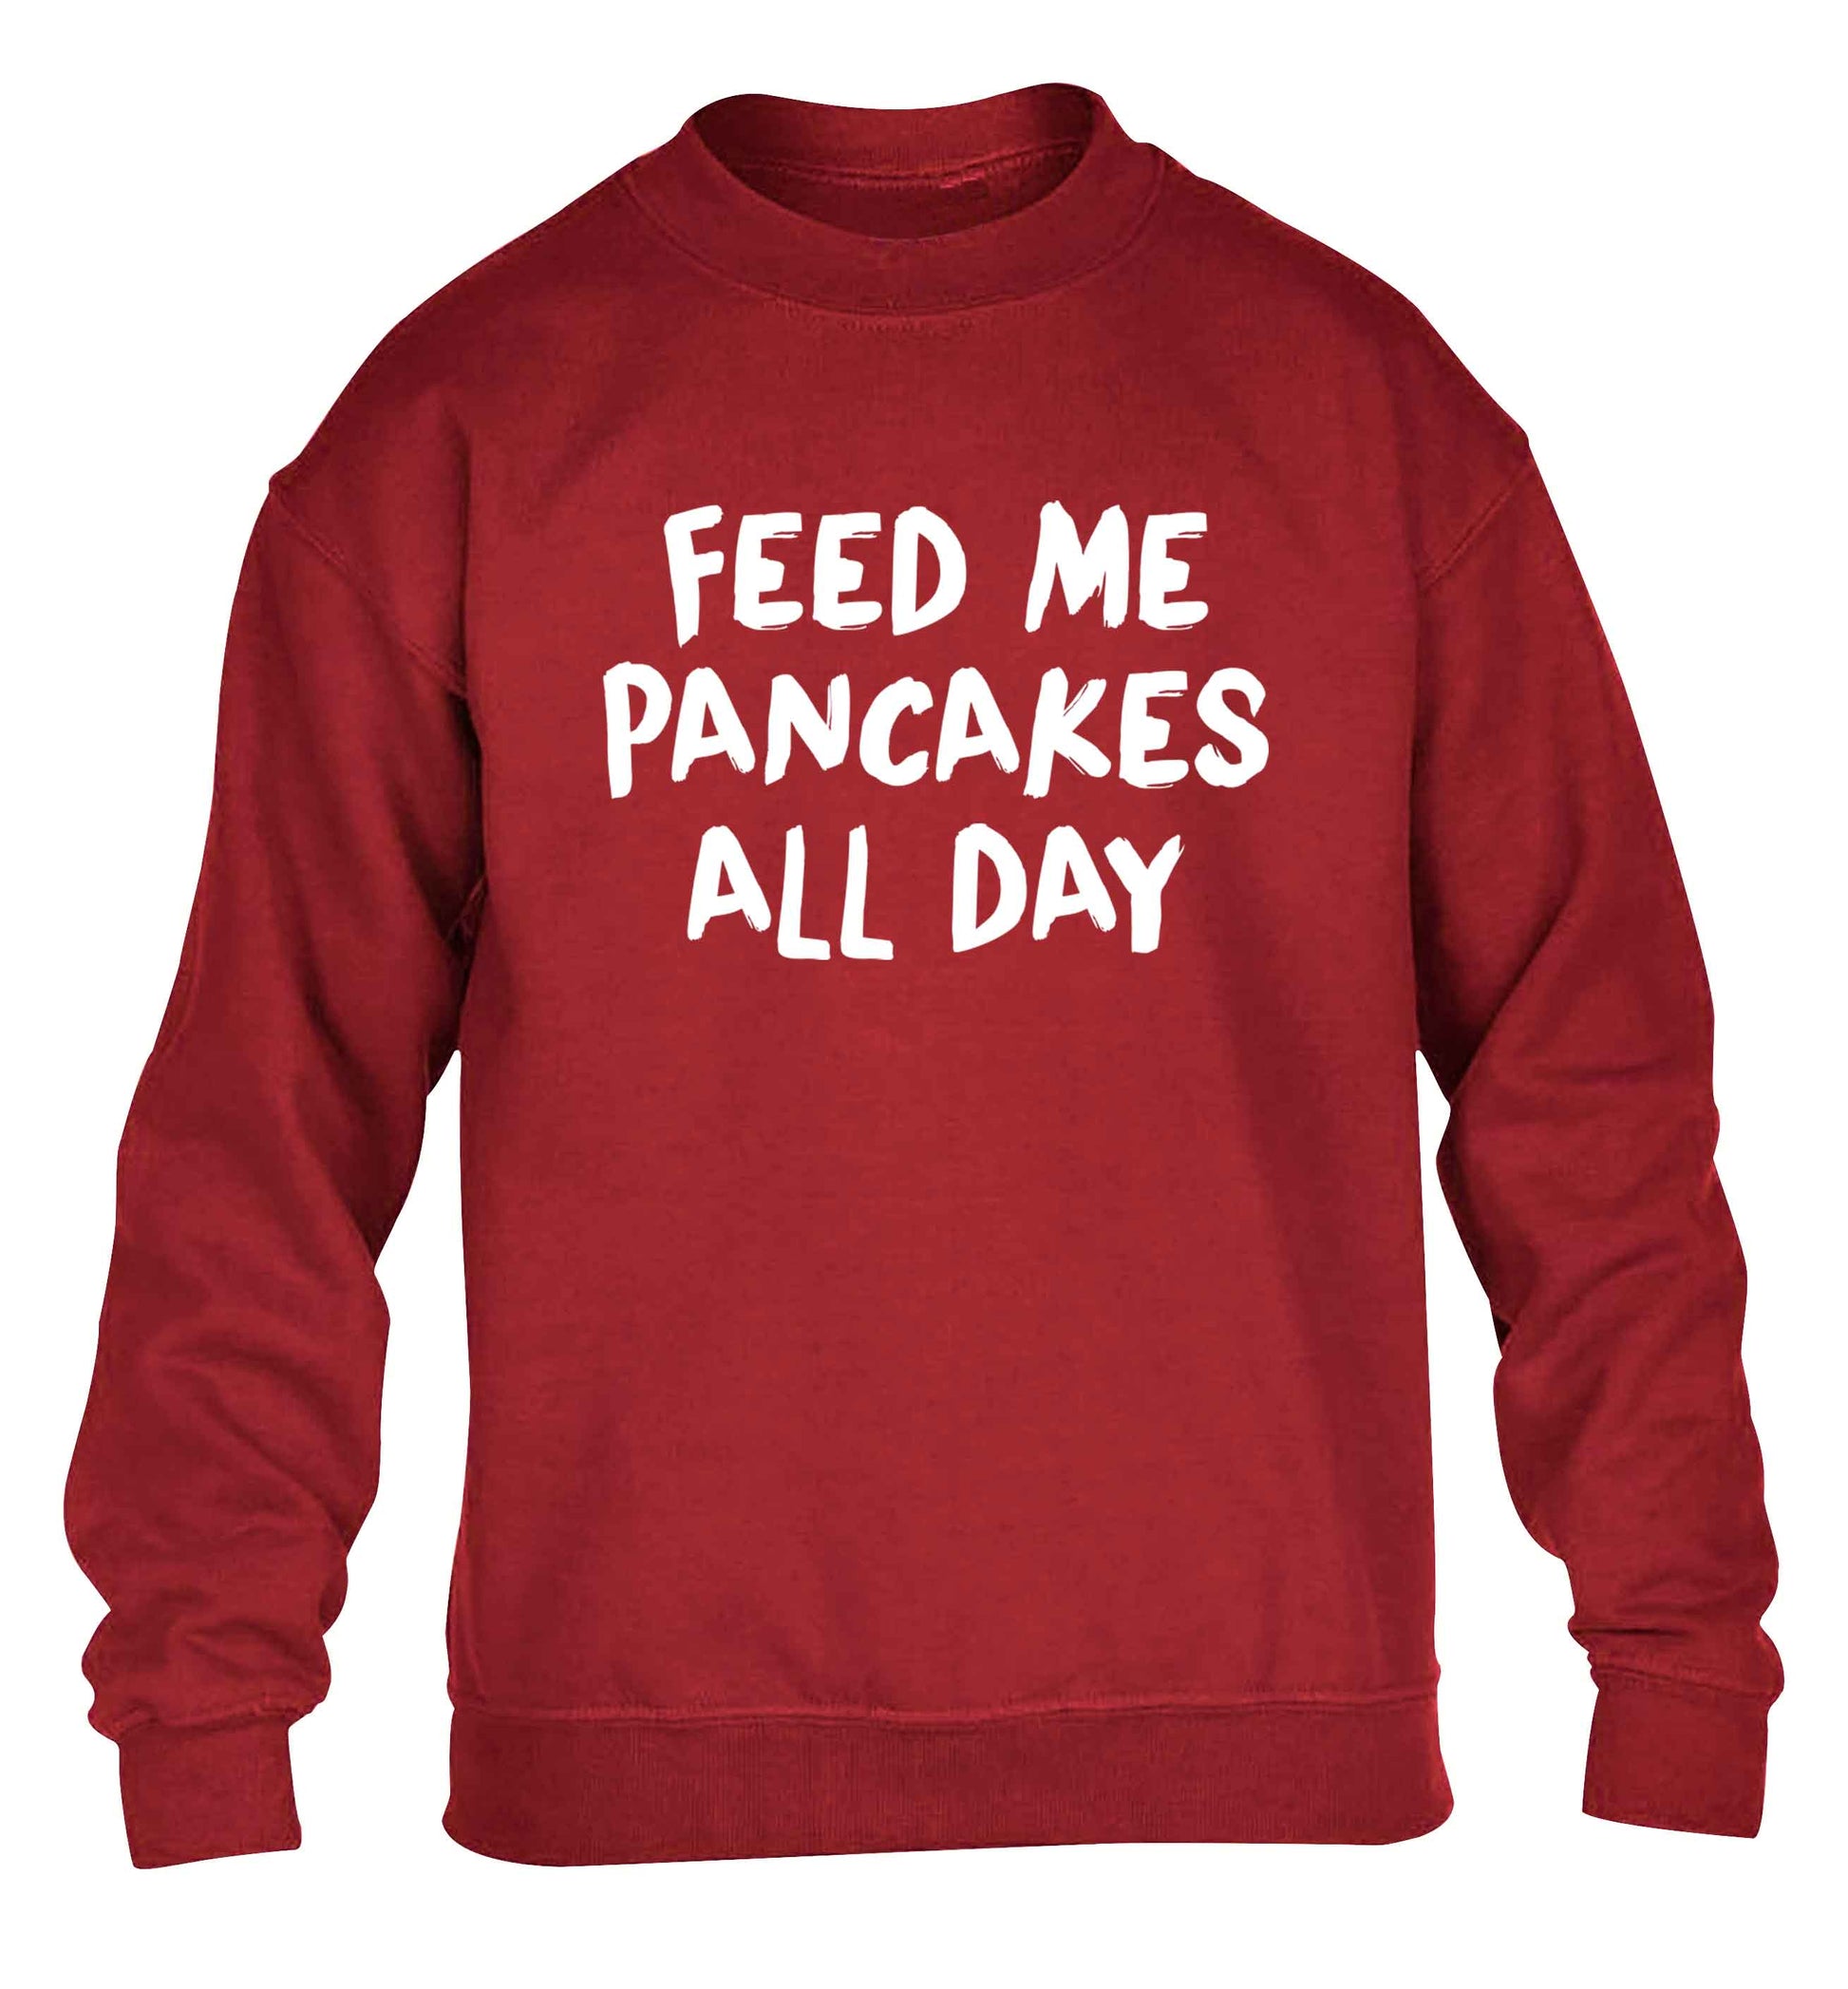 Feed me pancakes all day children's grey sweater 12-13 Years